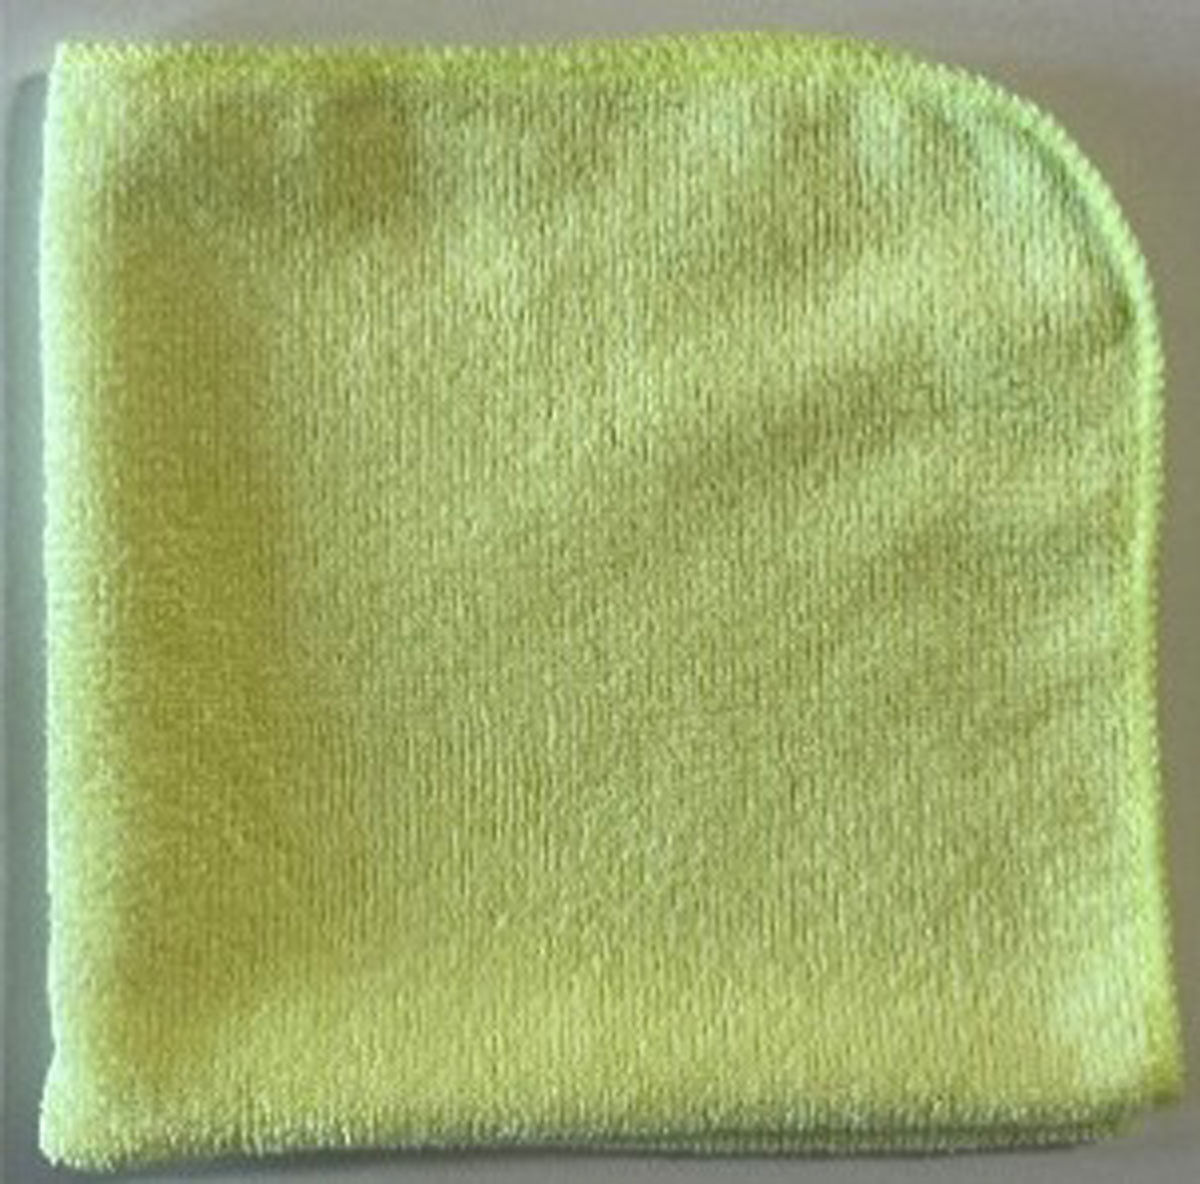 What surfaces are suitable for cleaning with these microfiber towel cloths?